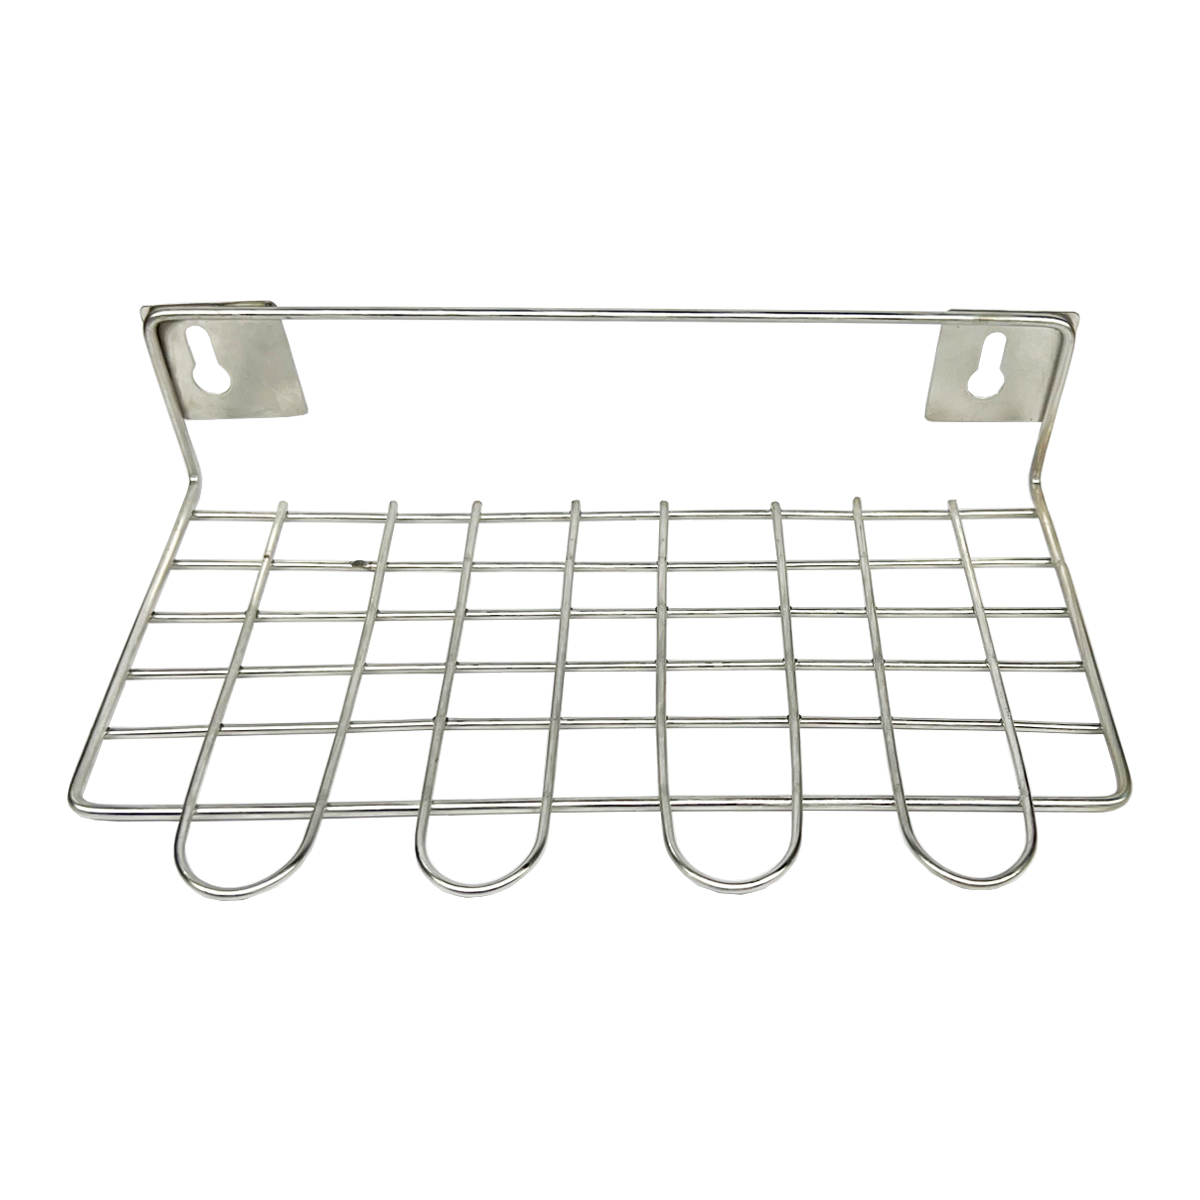 Oc9 Stainless Steel Ladle Stand / Spoon Rack / Wall Mounted Ladle Stand / Utensil Holder for Kitchen